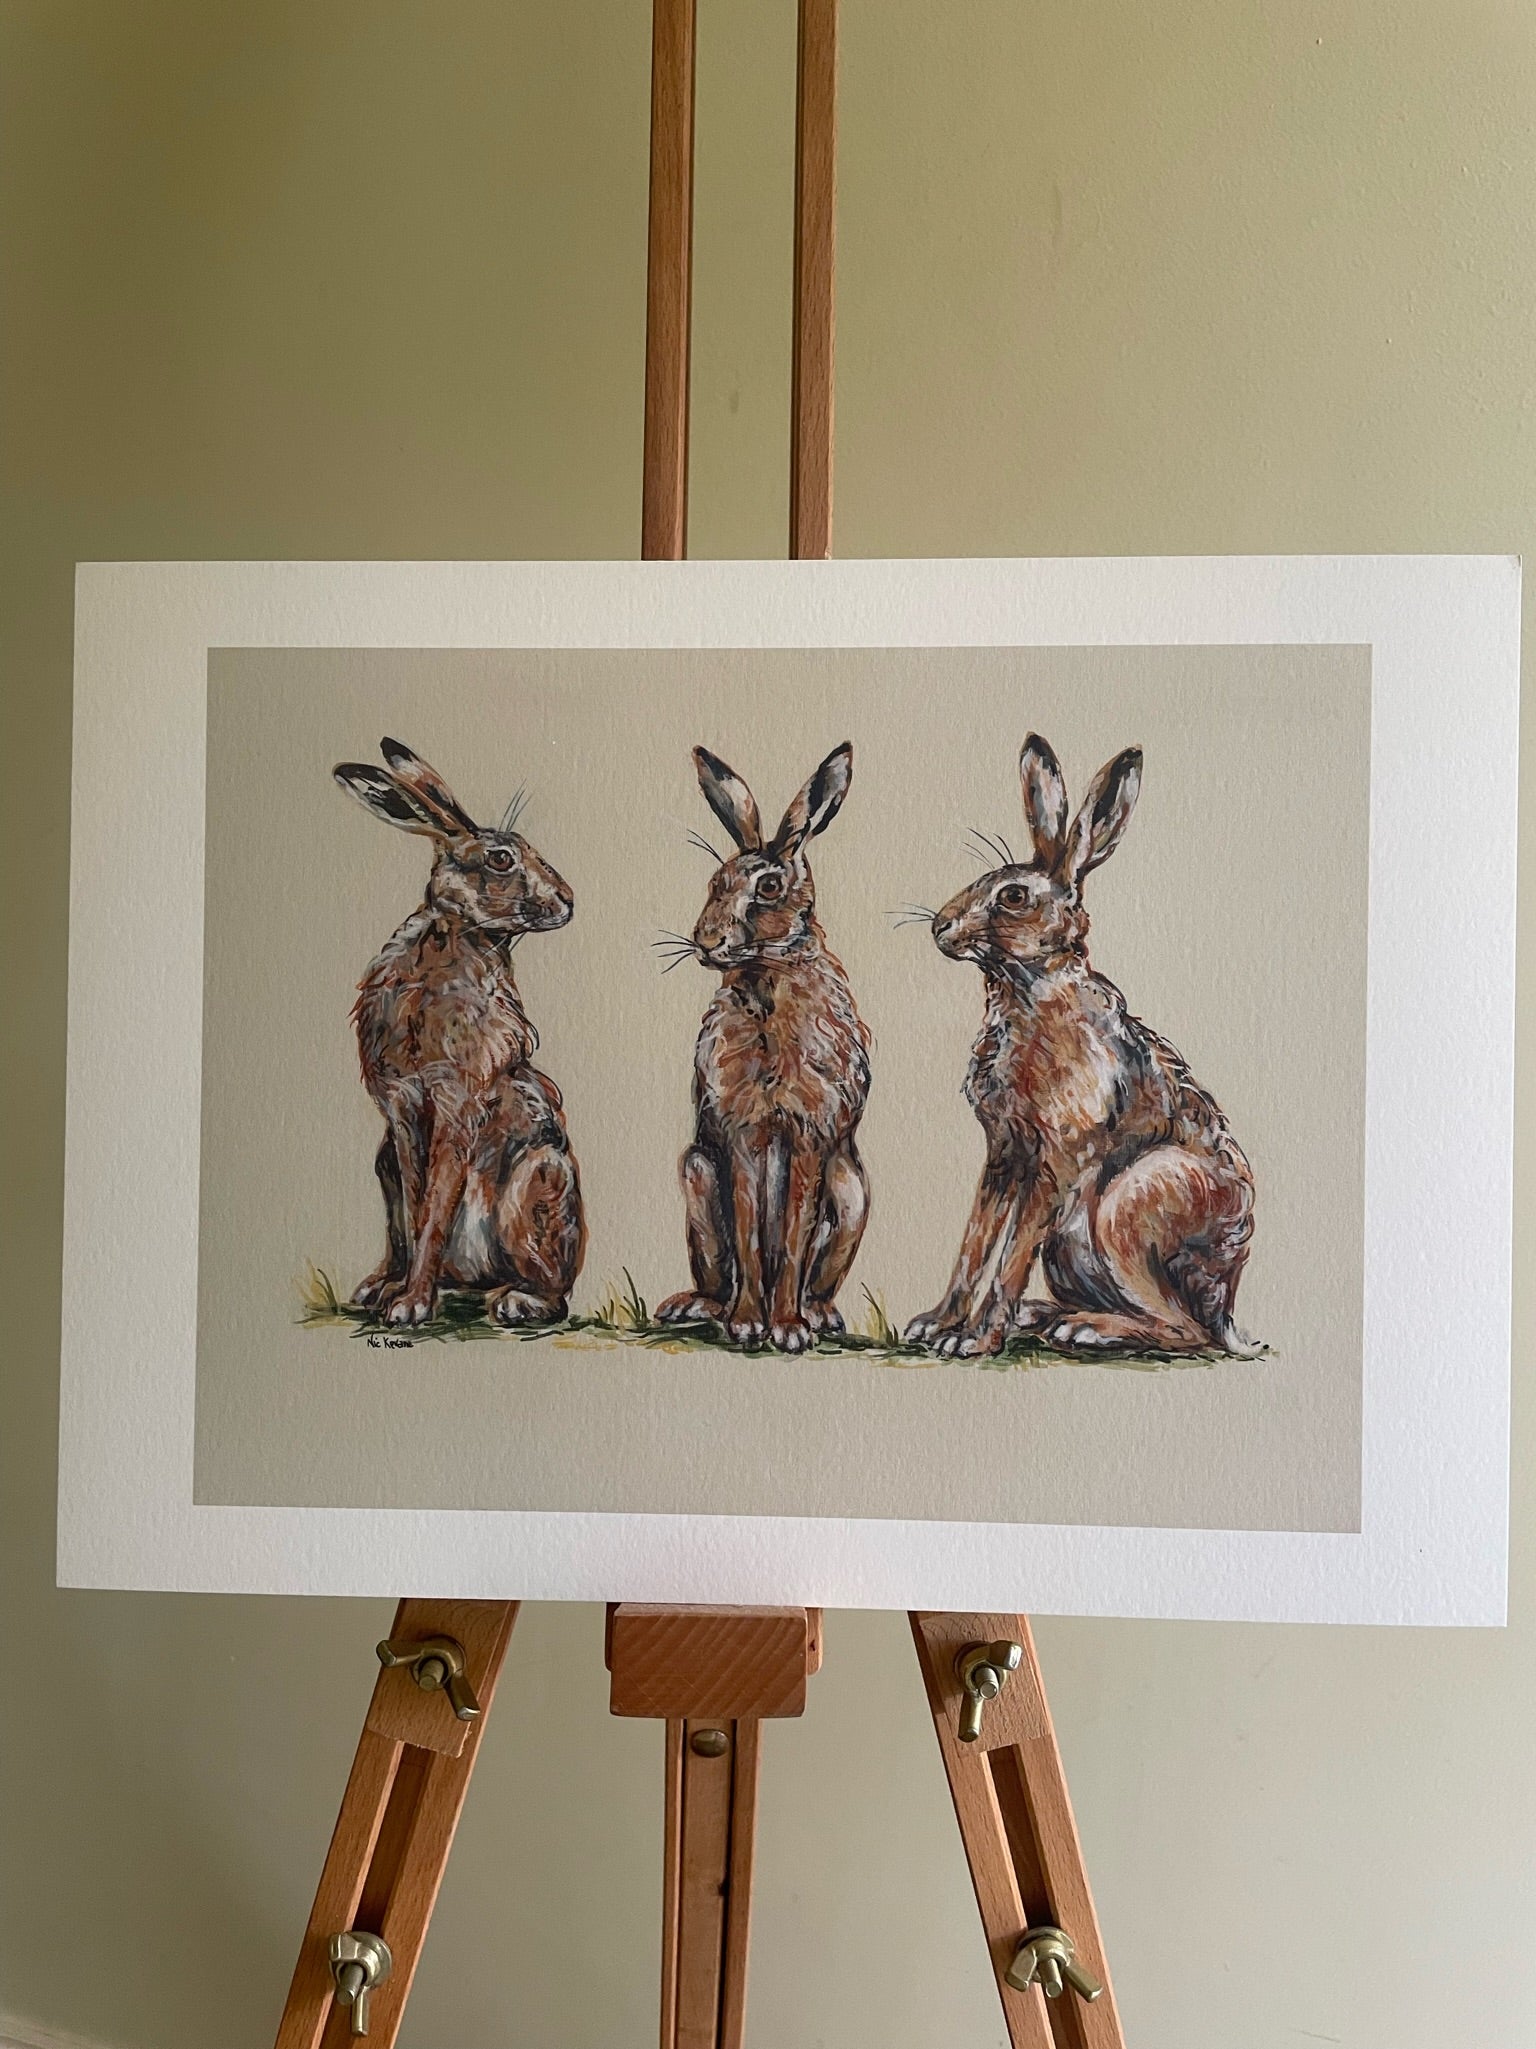 This print shows three hares together.  The background is a neutral fawn colour